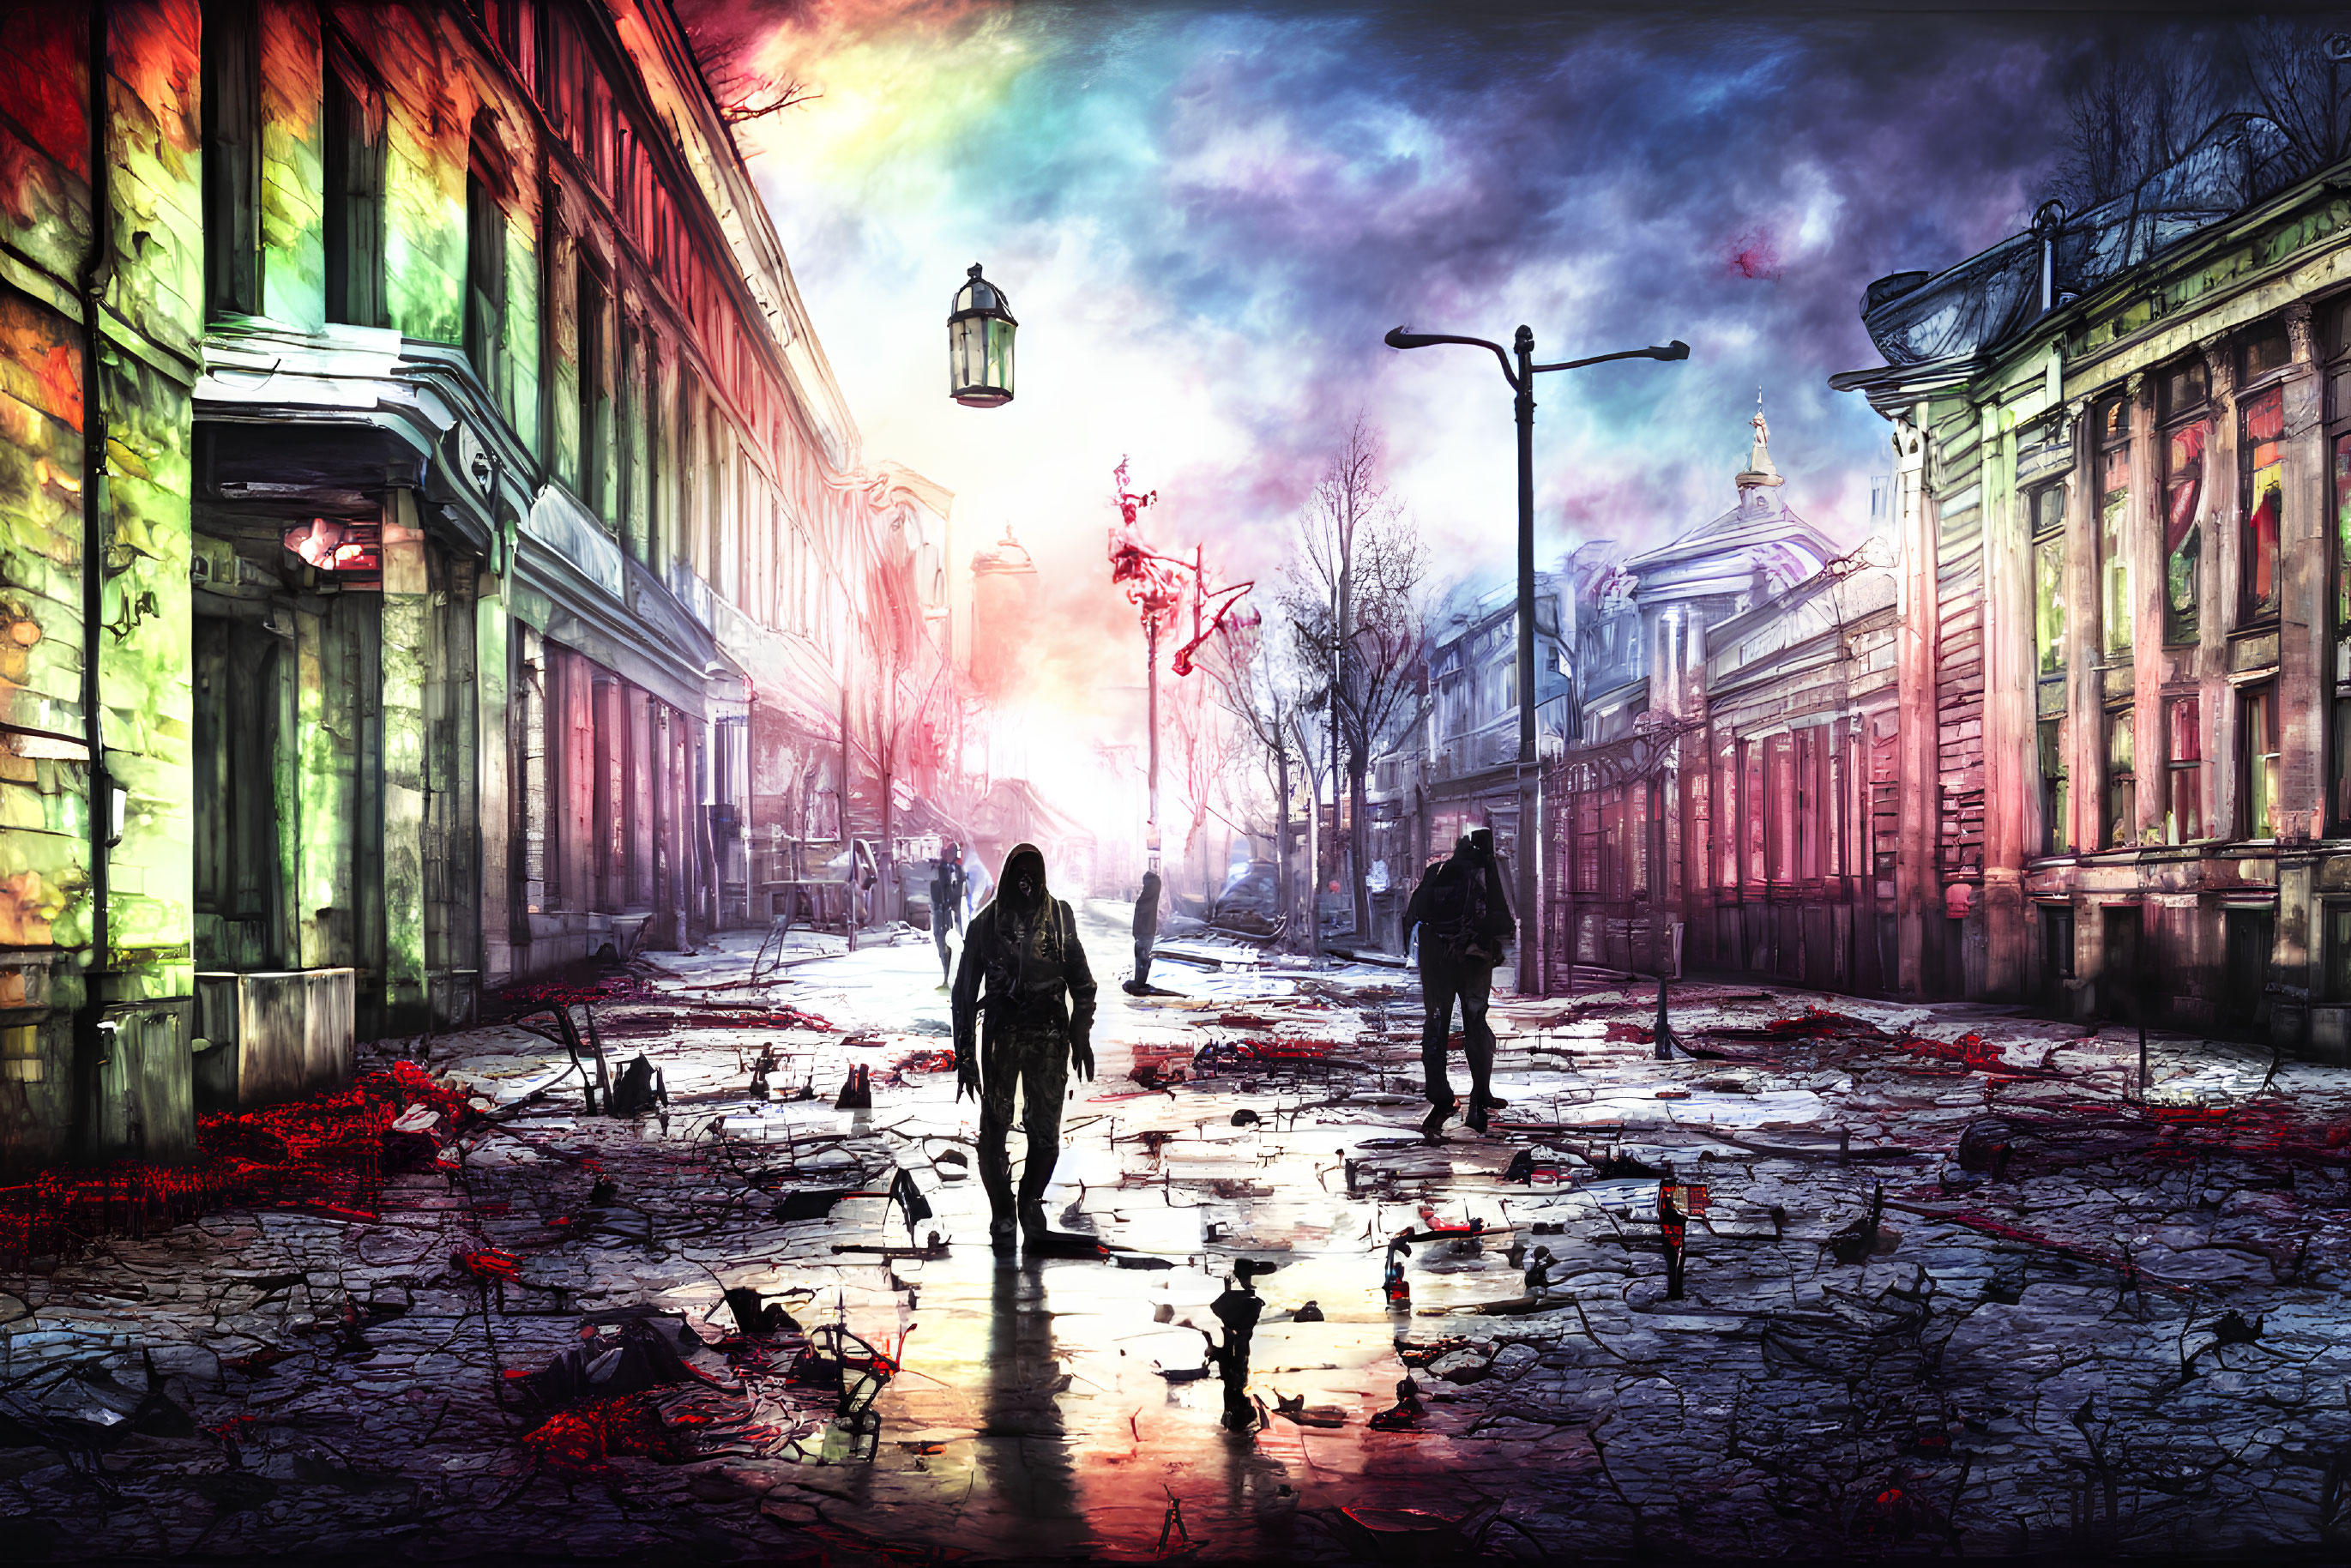 Apocalyptic cityscape with silhouetted figures and vivid skies